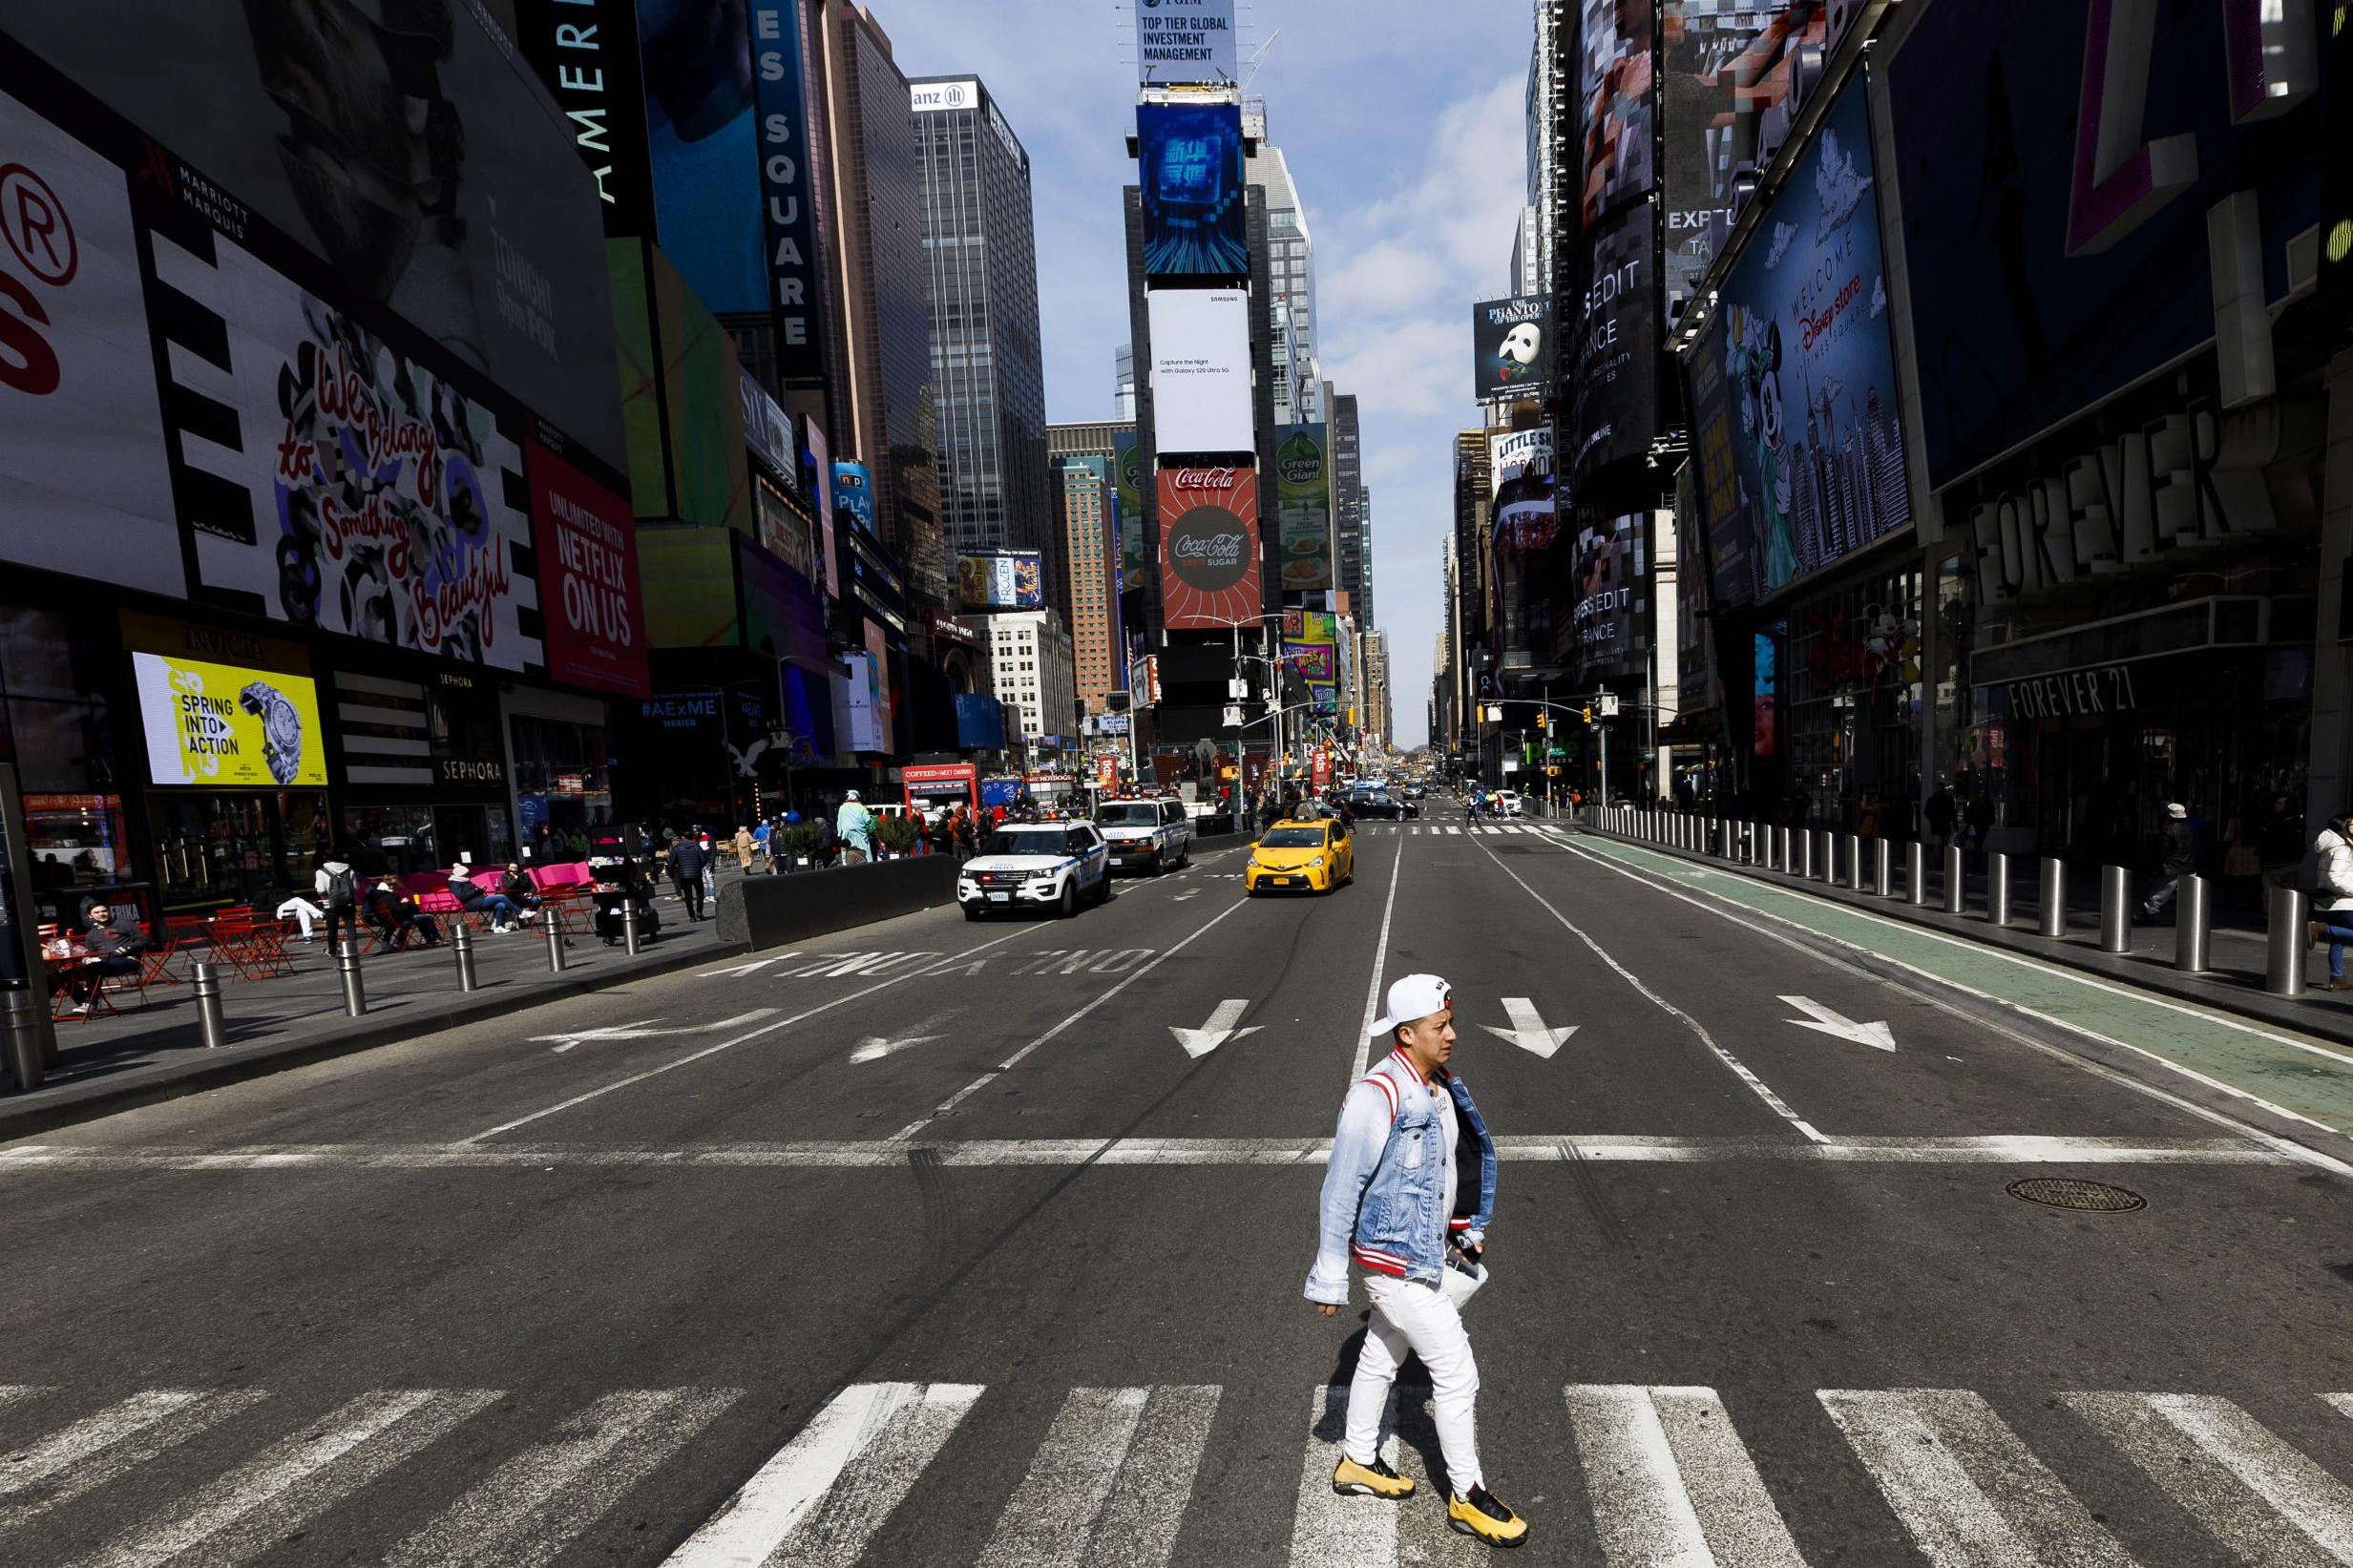 New York's streets have been unusually empty since bars, restaurants and cafes were ordered to close